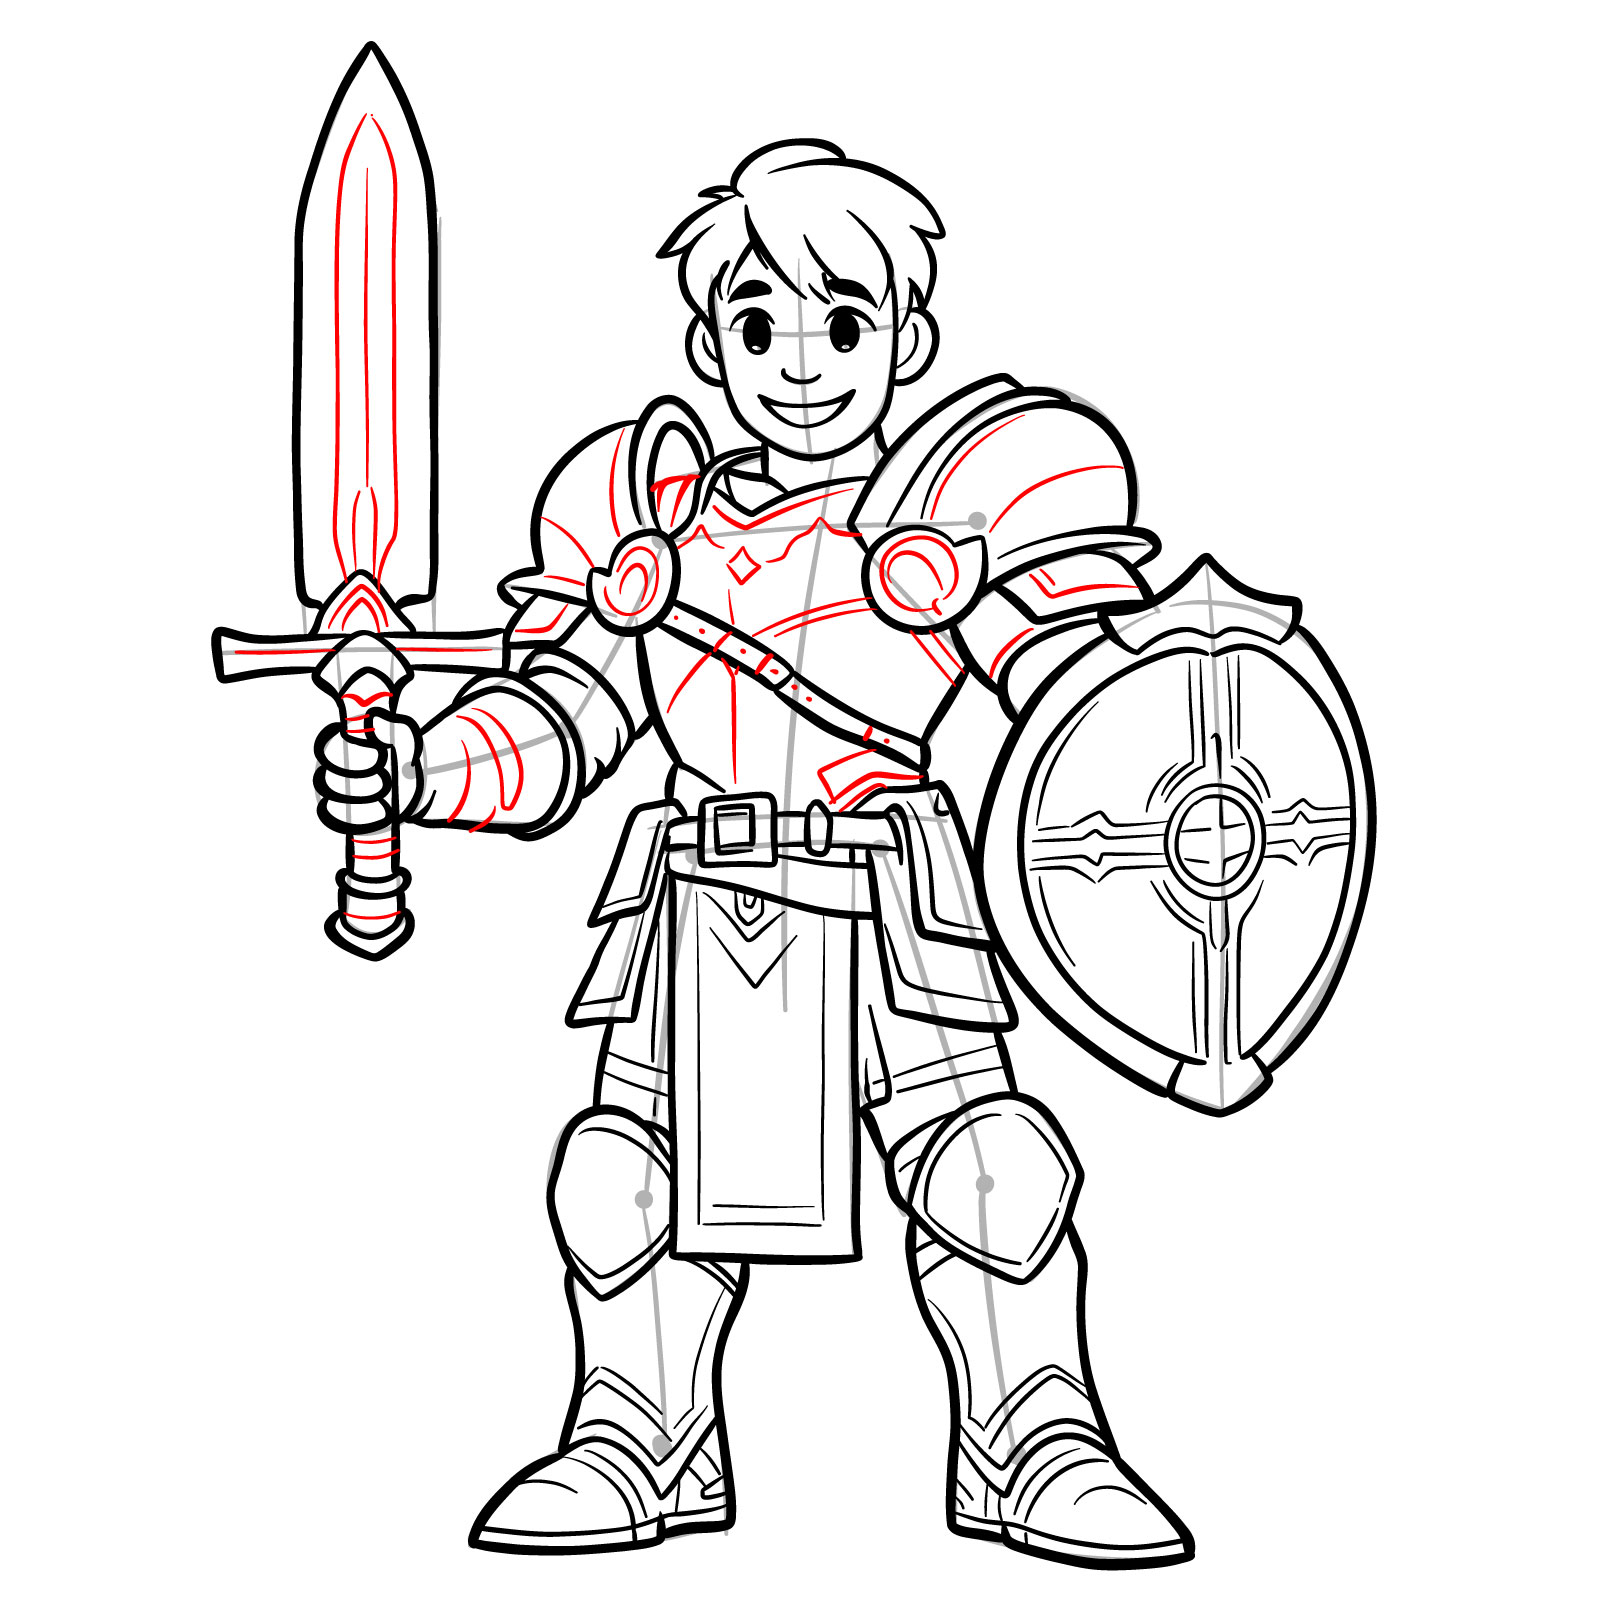 How to draw a paladin step 22: sword detailing